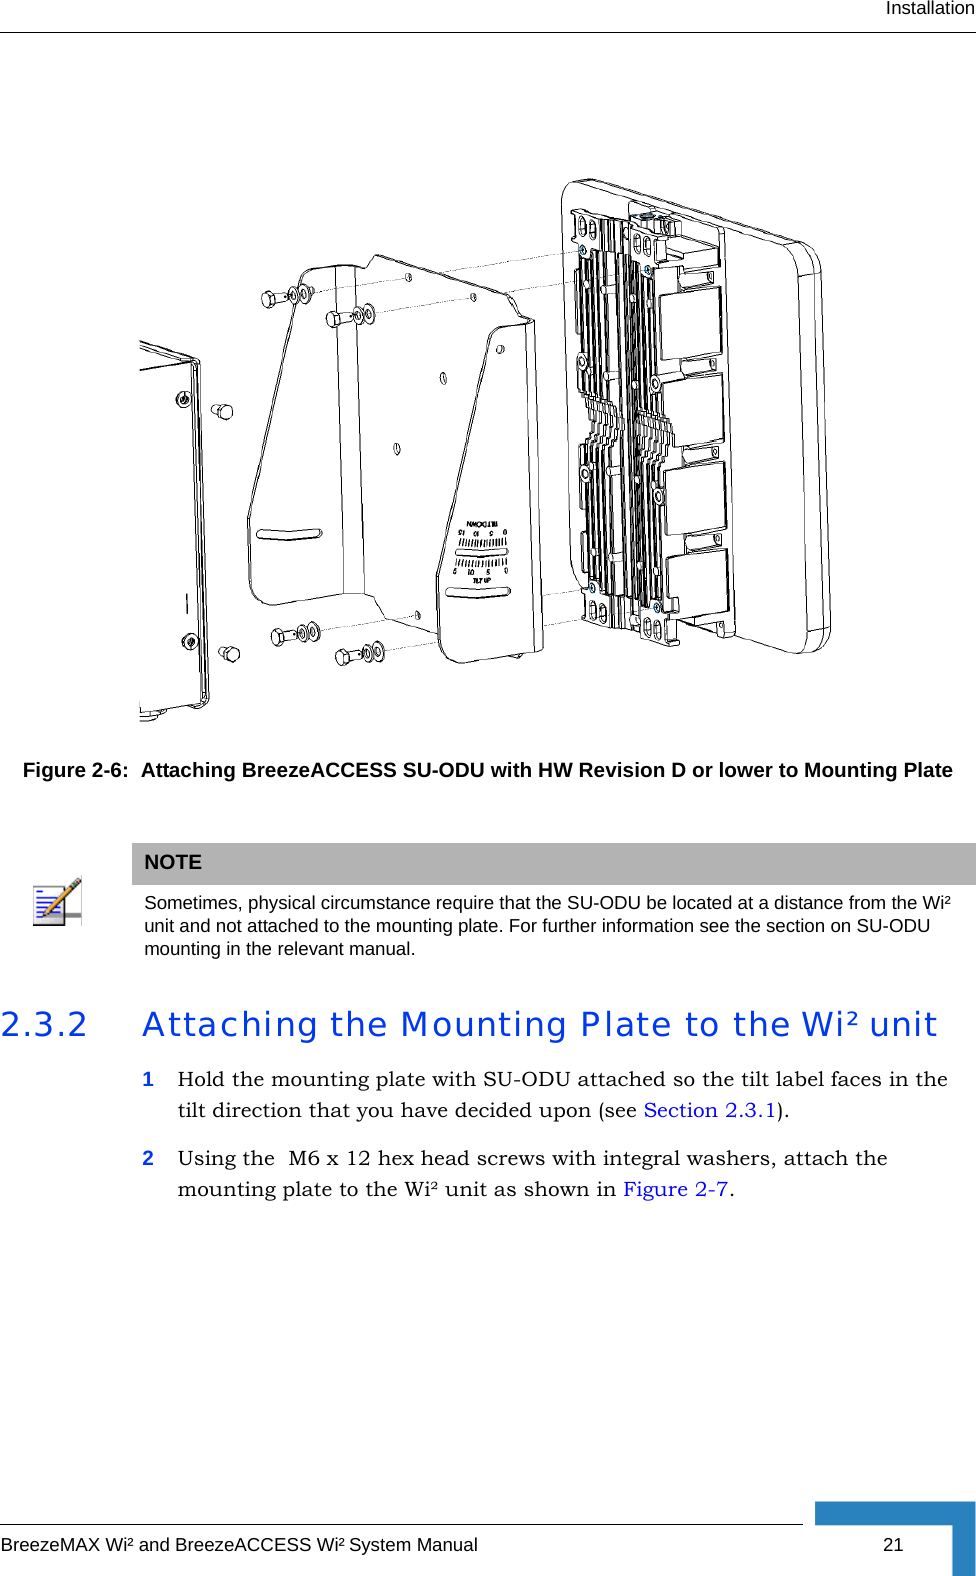 InstallationBreezeMAX Wi² and BreezeACCESS Wi² System Manual 212.3.2 Attaching the Mounting Plate to the Wi² unit1Hold the mounting plate with SU-ODU attached so the tilt label faces in the  tilt direction that you have decided upon (see Section 2.3.1). 2Using the  M6 x 12 hex head screws with integral washers, attach the mounting plate to the Wi² unit as shown in Figure 2-7. Figure 2-6:  Attaching BreezeACCESS SU-ODU with HW Revision D or lower to Mounting PlateNOTESometimes, physical circumstance require that the SU-ODU be located at a distance from the Wi² unit and not attached to the mounting plate. For further information see the section on SU-ODU mounting in the relevant manual.